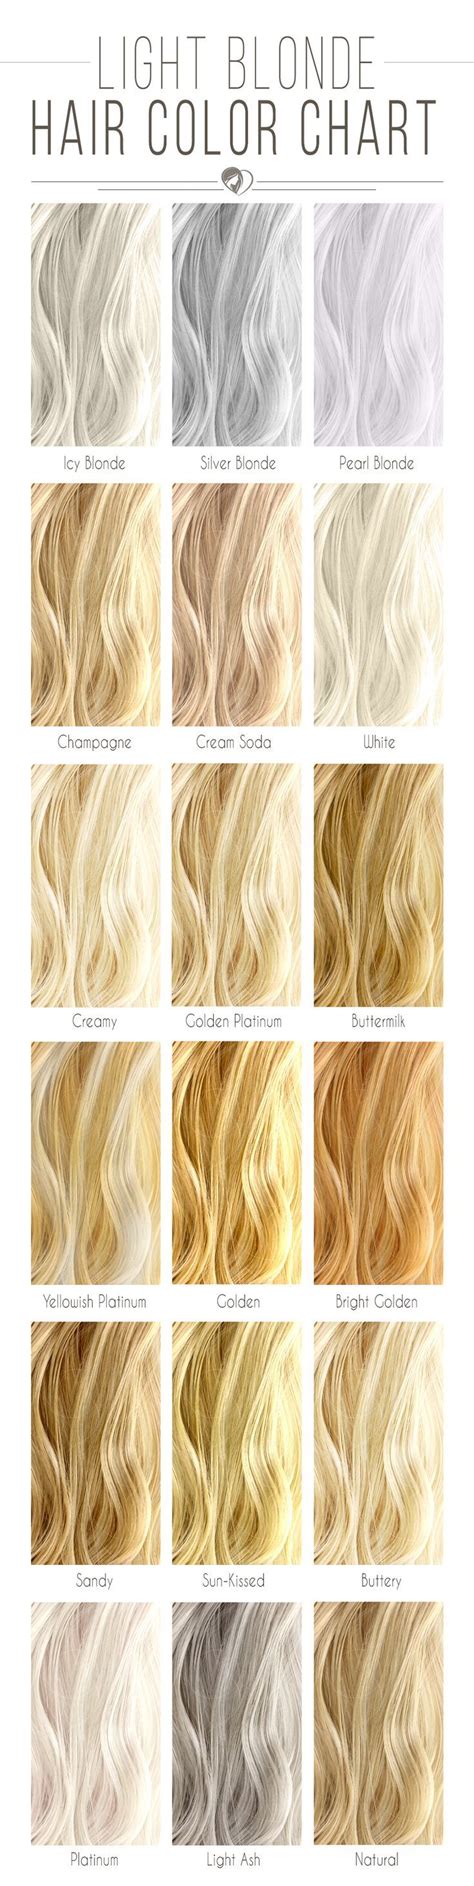 Best Colors To Dye Blonde Hair The Best Hair Color Chart With All How